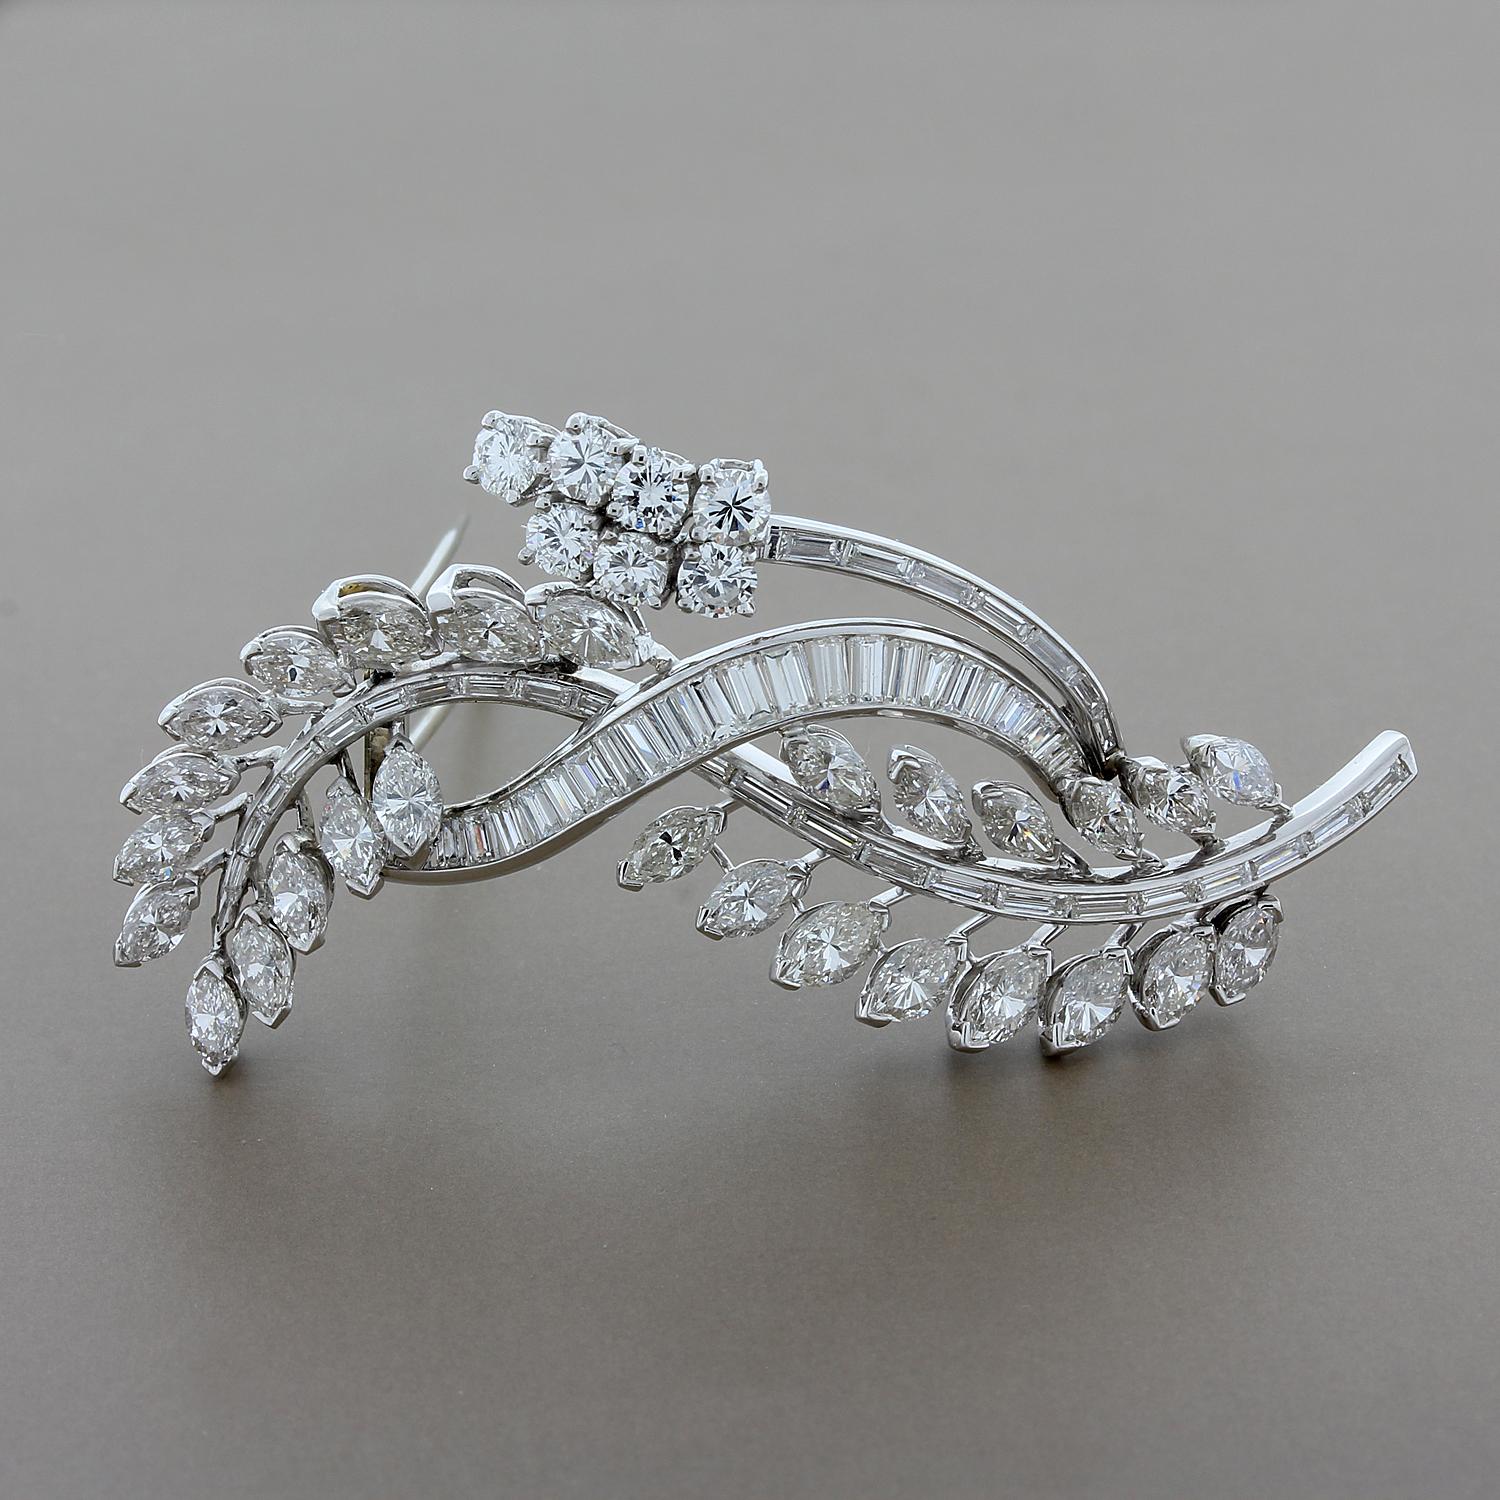 This exquisite estate brooch features 6.92 carats of sparkling white VS quality diamonds. The round cut, marquise cut and baguette cut diamonds are set in platinum because you deserve utmost luxury!

Brooch Length: 2.25 inches
Brooch Width: 1.25